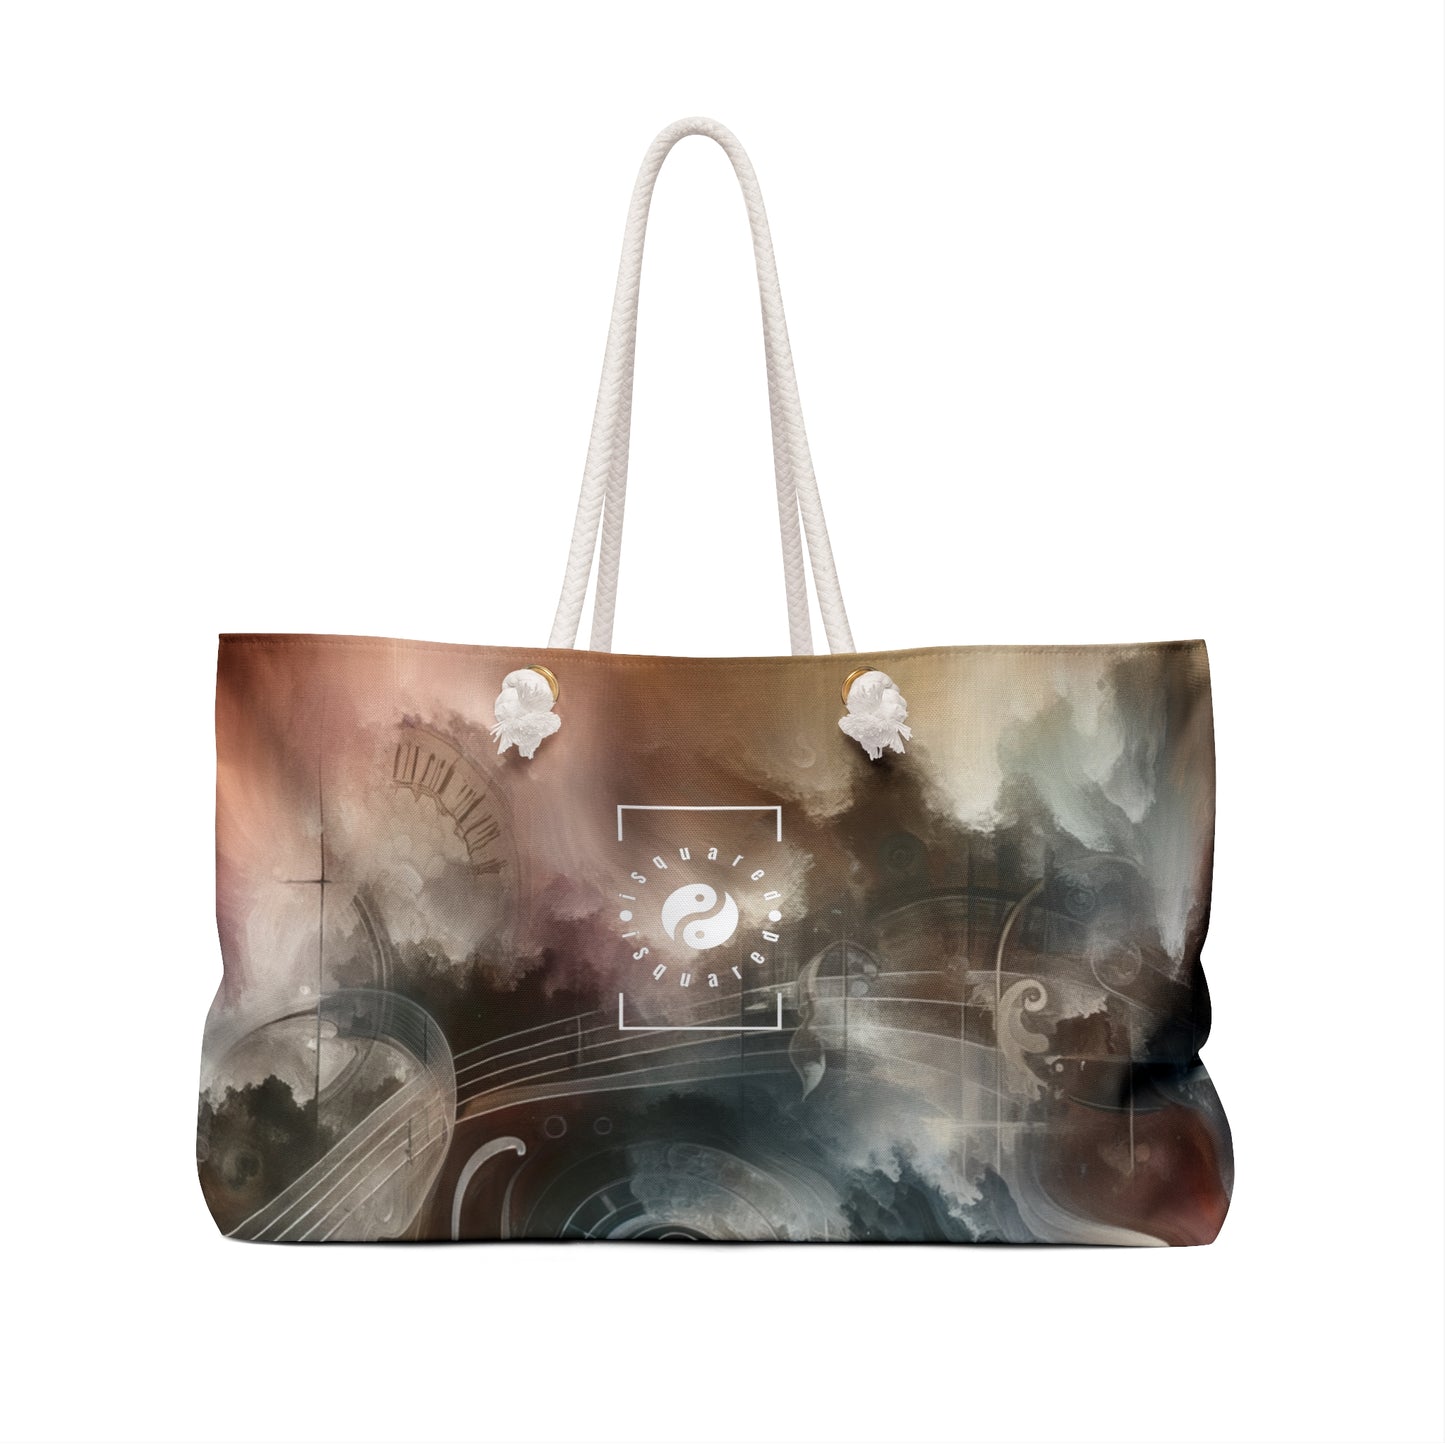 "Harmony of Descent: An Abstract Ode to La Traviata" - Casual Yoga Bag